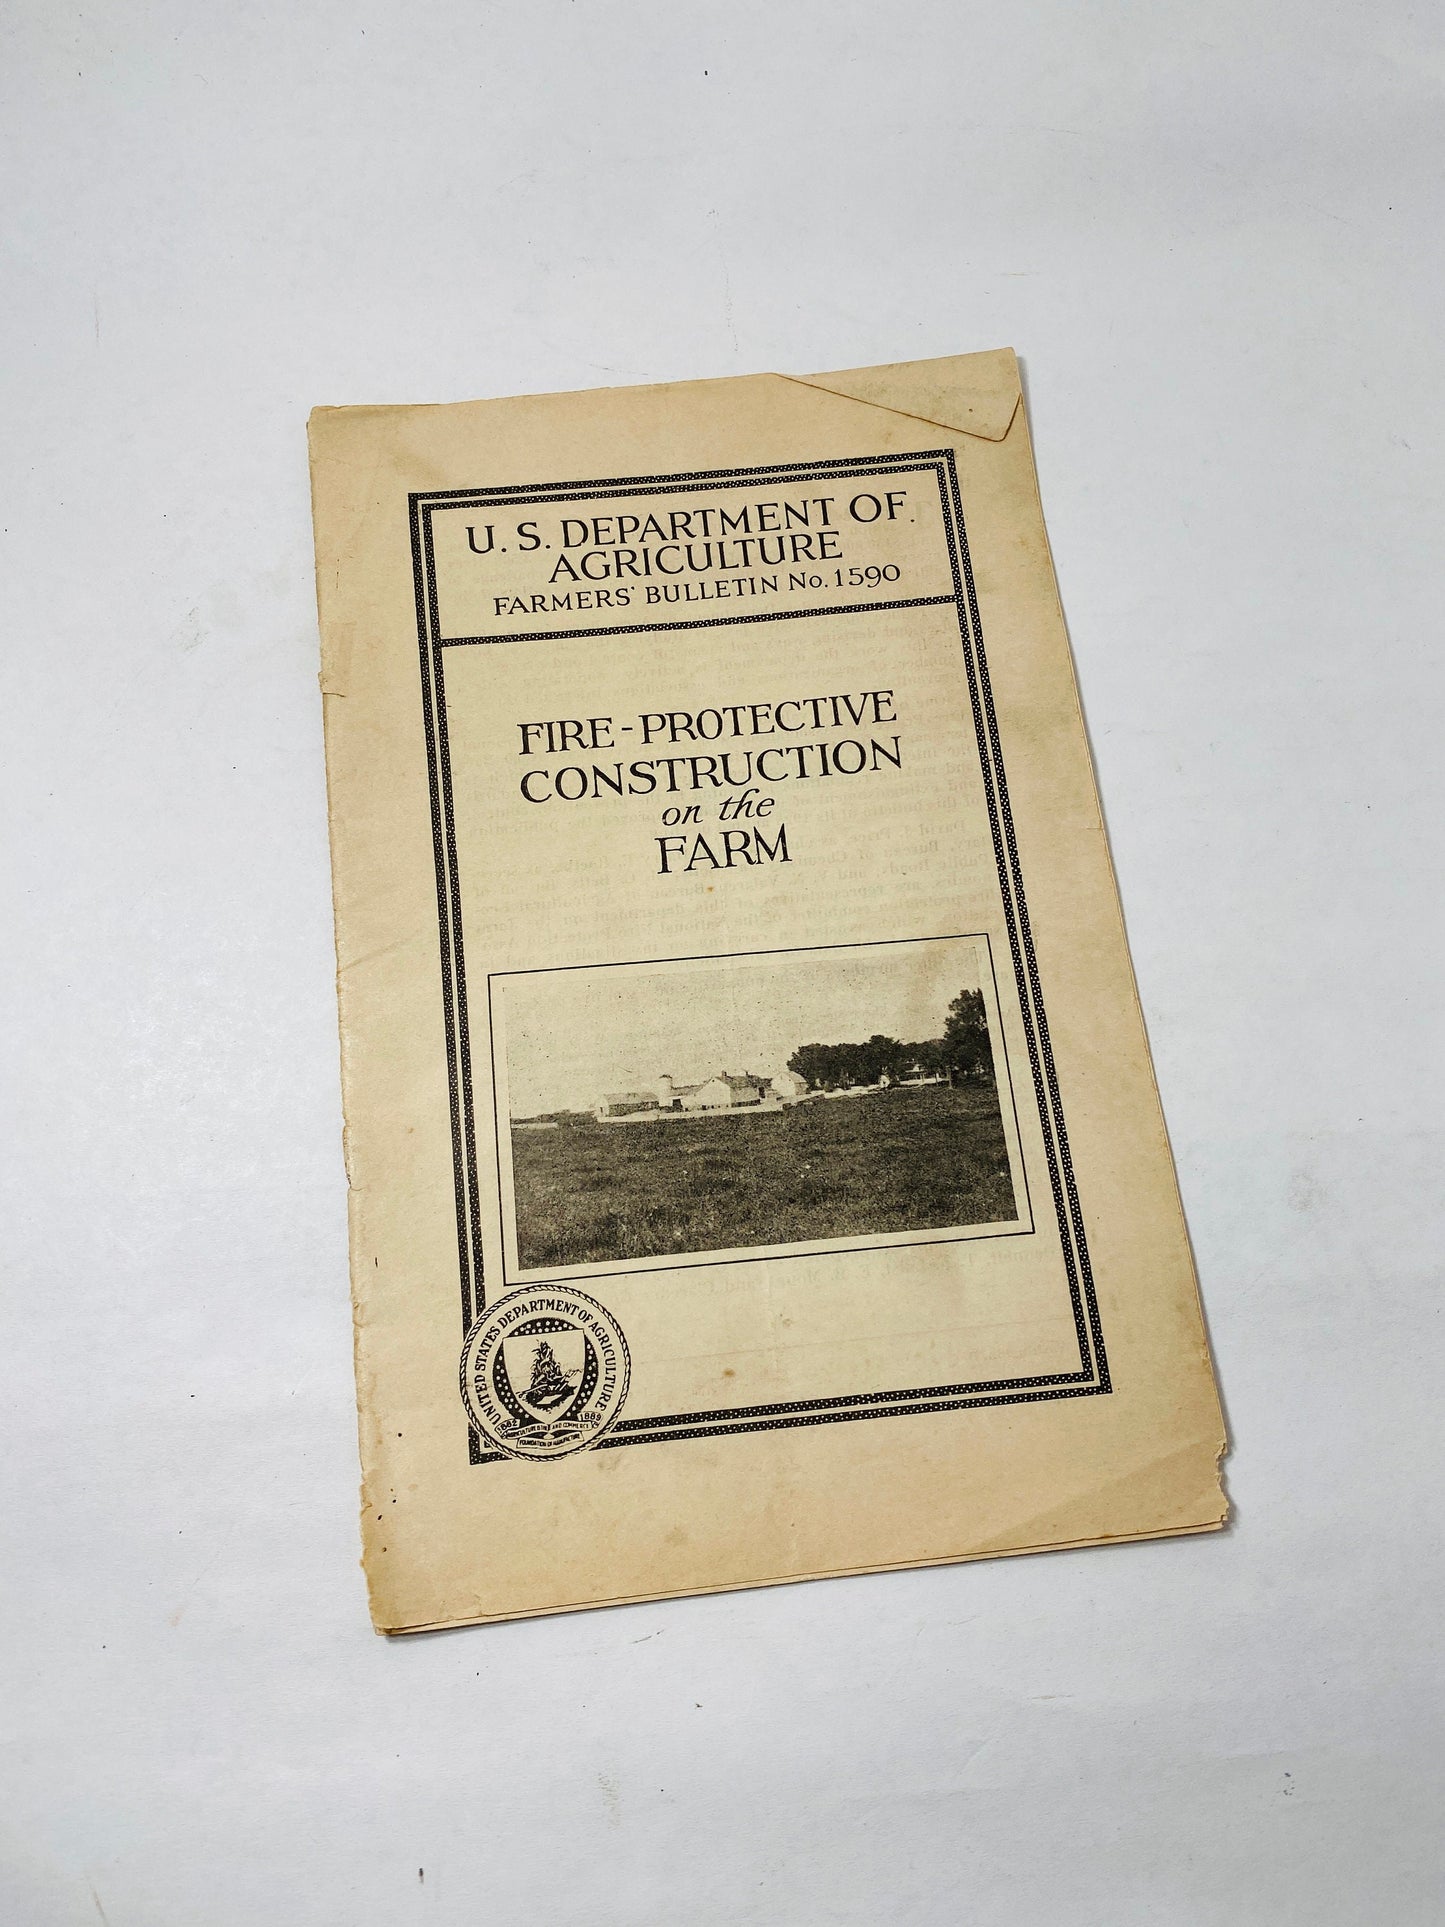 1940s Vintage Agriculture Department farm booklets off grid homestead Sheep raising wood floor construction slaughtering livestock water